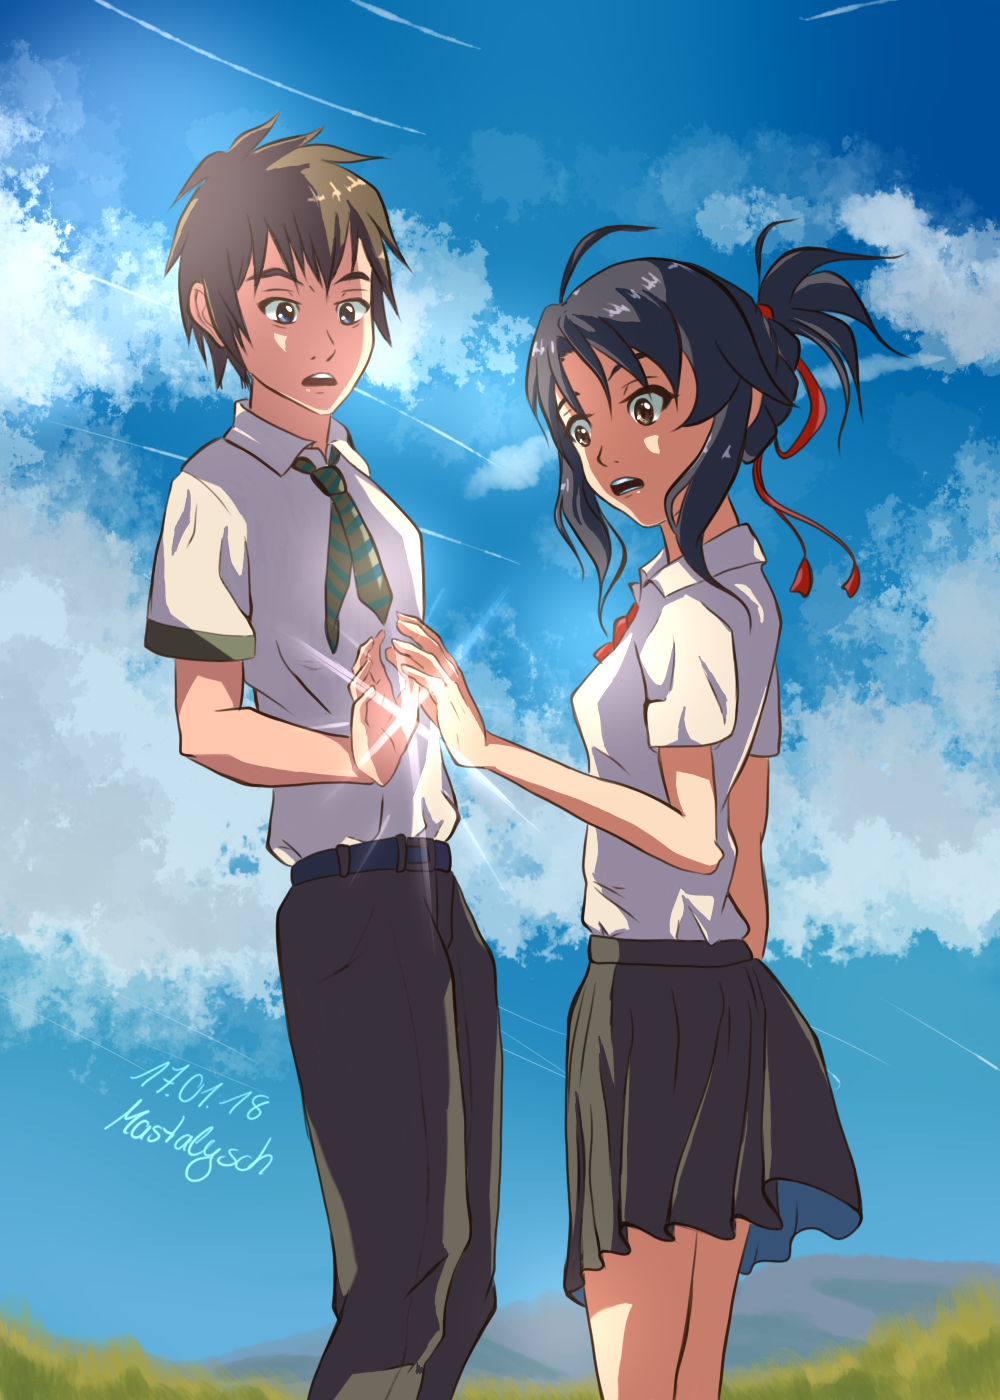 Kimi no Na wa - Your Name by Prophecy2011 on DeviantArt